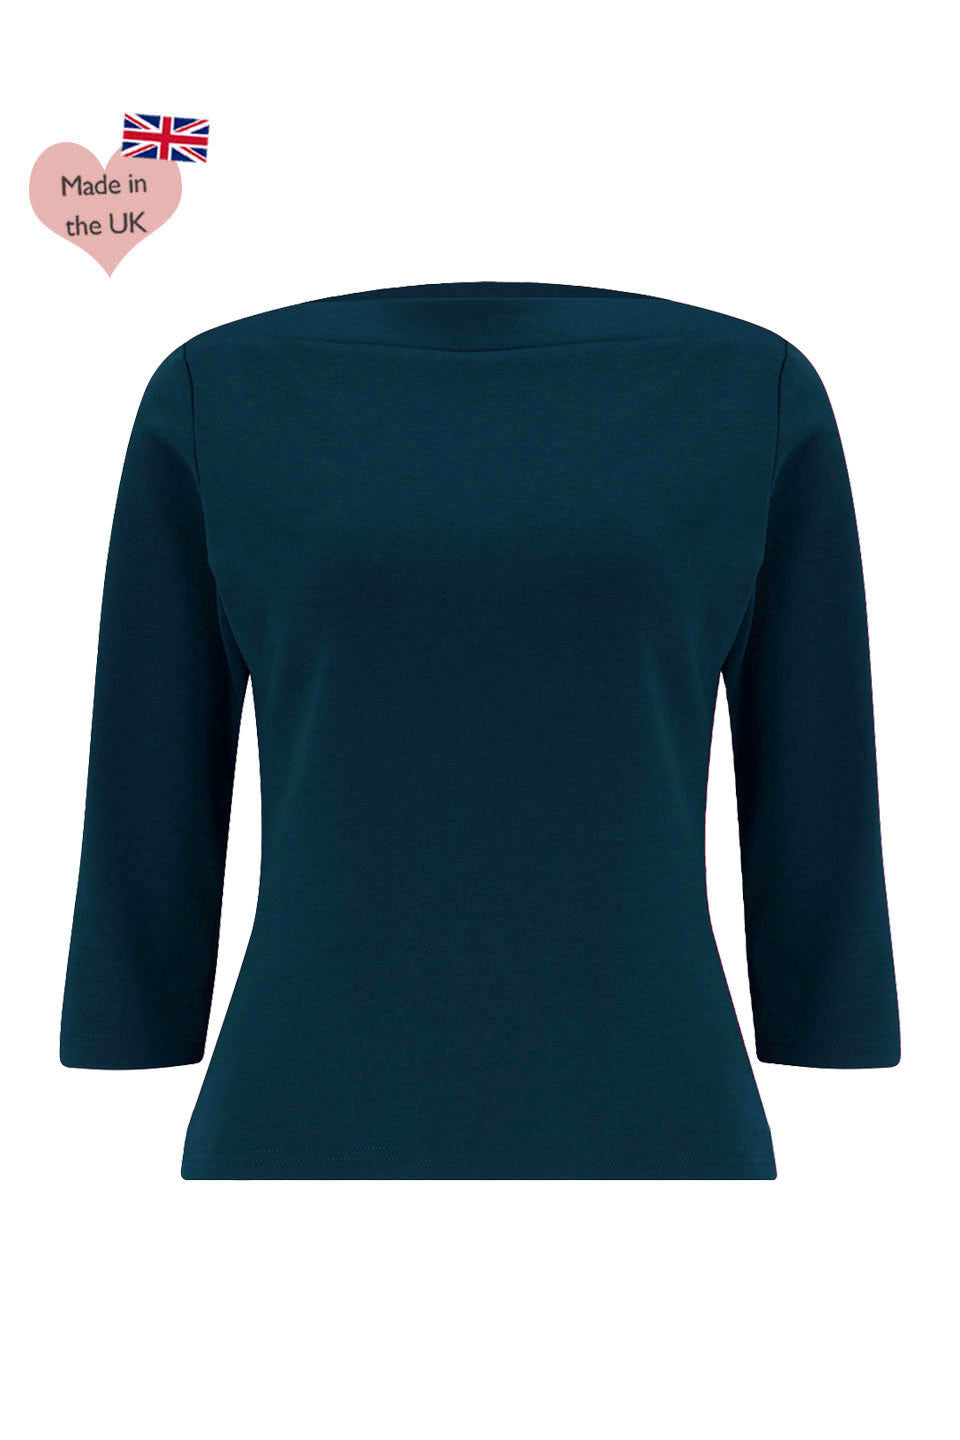 50s Style Quarter Sleeves Janet Slash Neck Top In Teal | Retro Pin Up Style | Weekend Doll